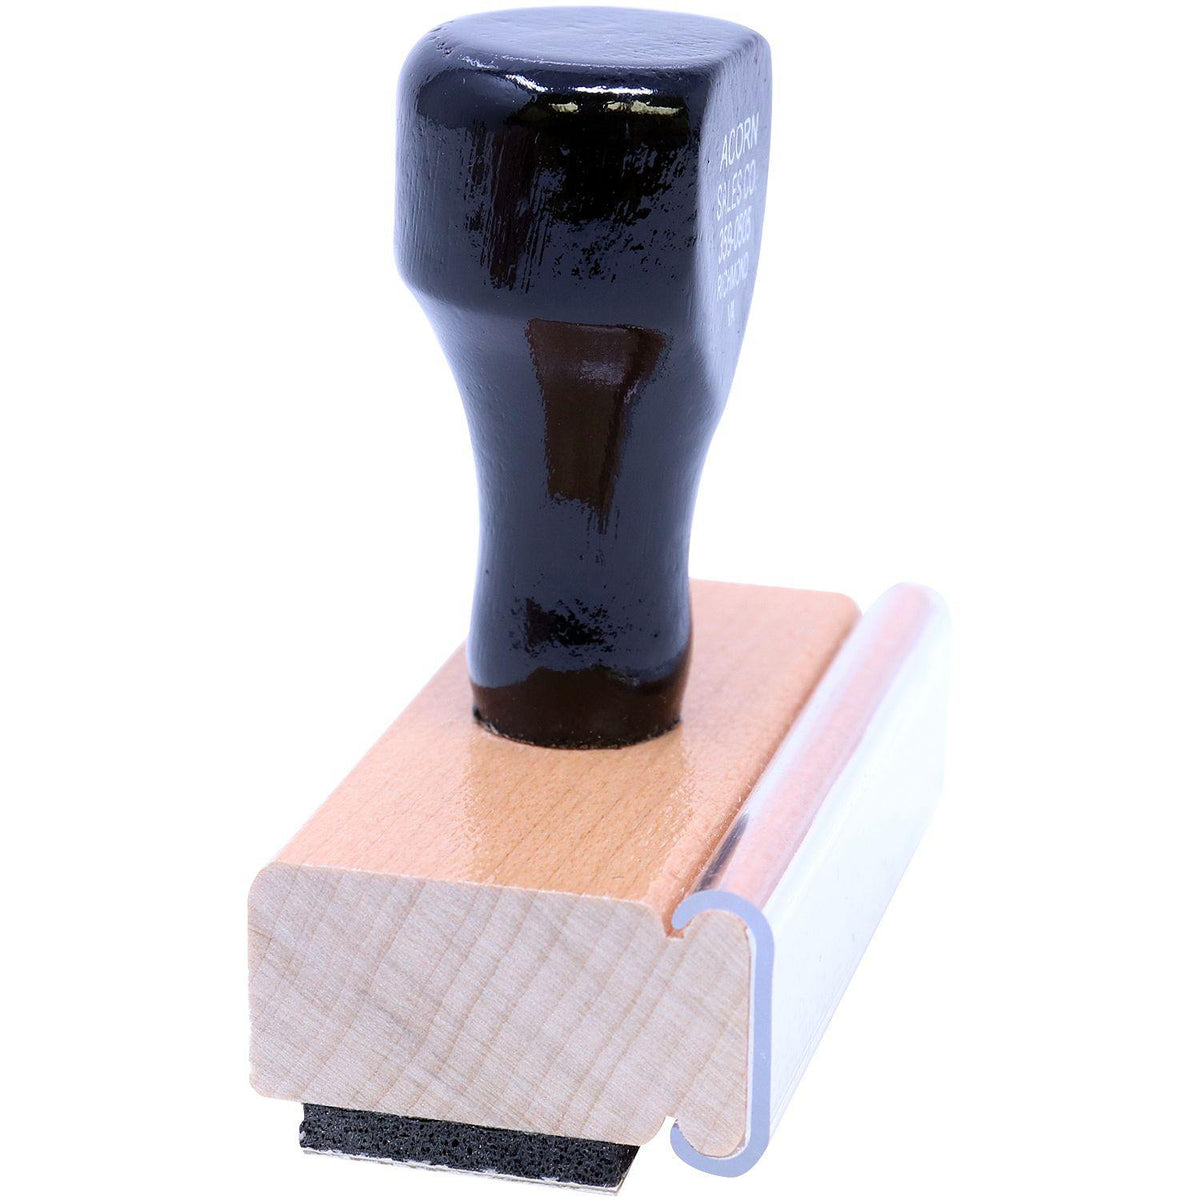 Side View of Large Hot Document Rubber Stamp at an Angle